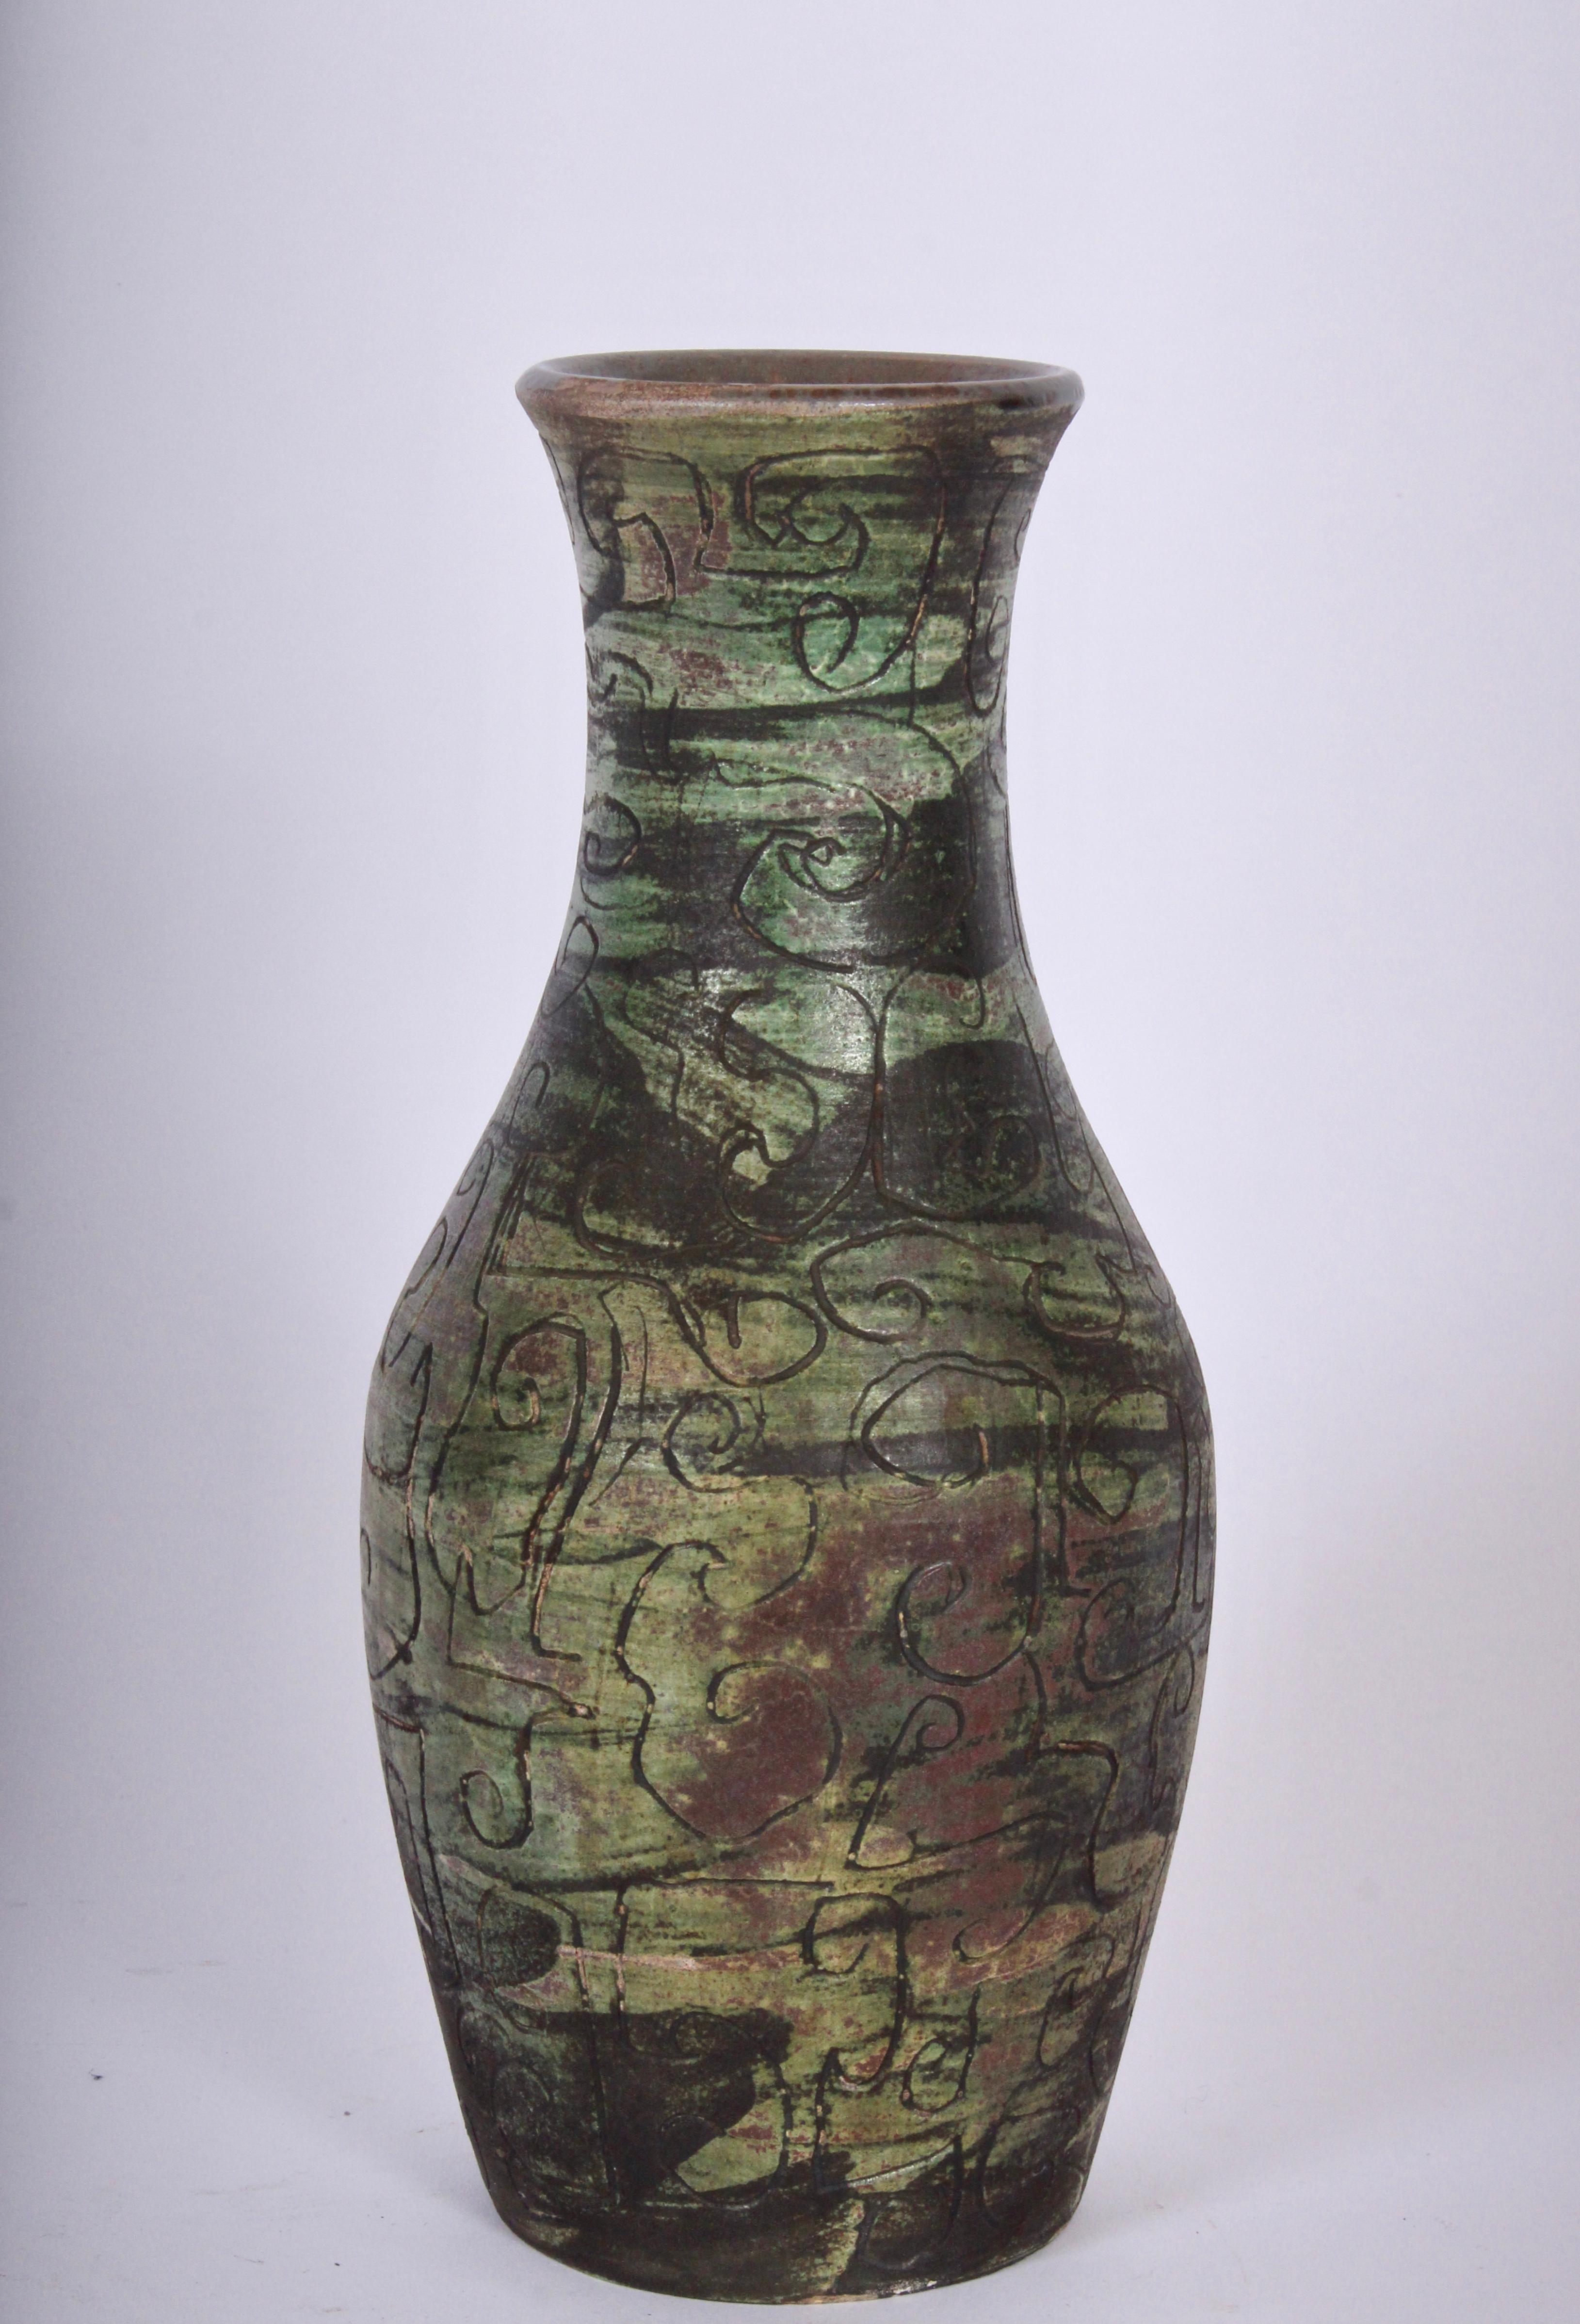 Handcrafted french ceramic incised vase with lively Green toned color. Featuring hand applied sgraffito decoration in bright camouflage tonality. Greens, Taupe, Brown, Gold, Mauve, Earthen coloration. Reflective. Gloss glazed interior. 3.5D top.